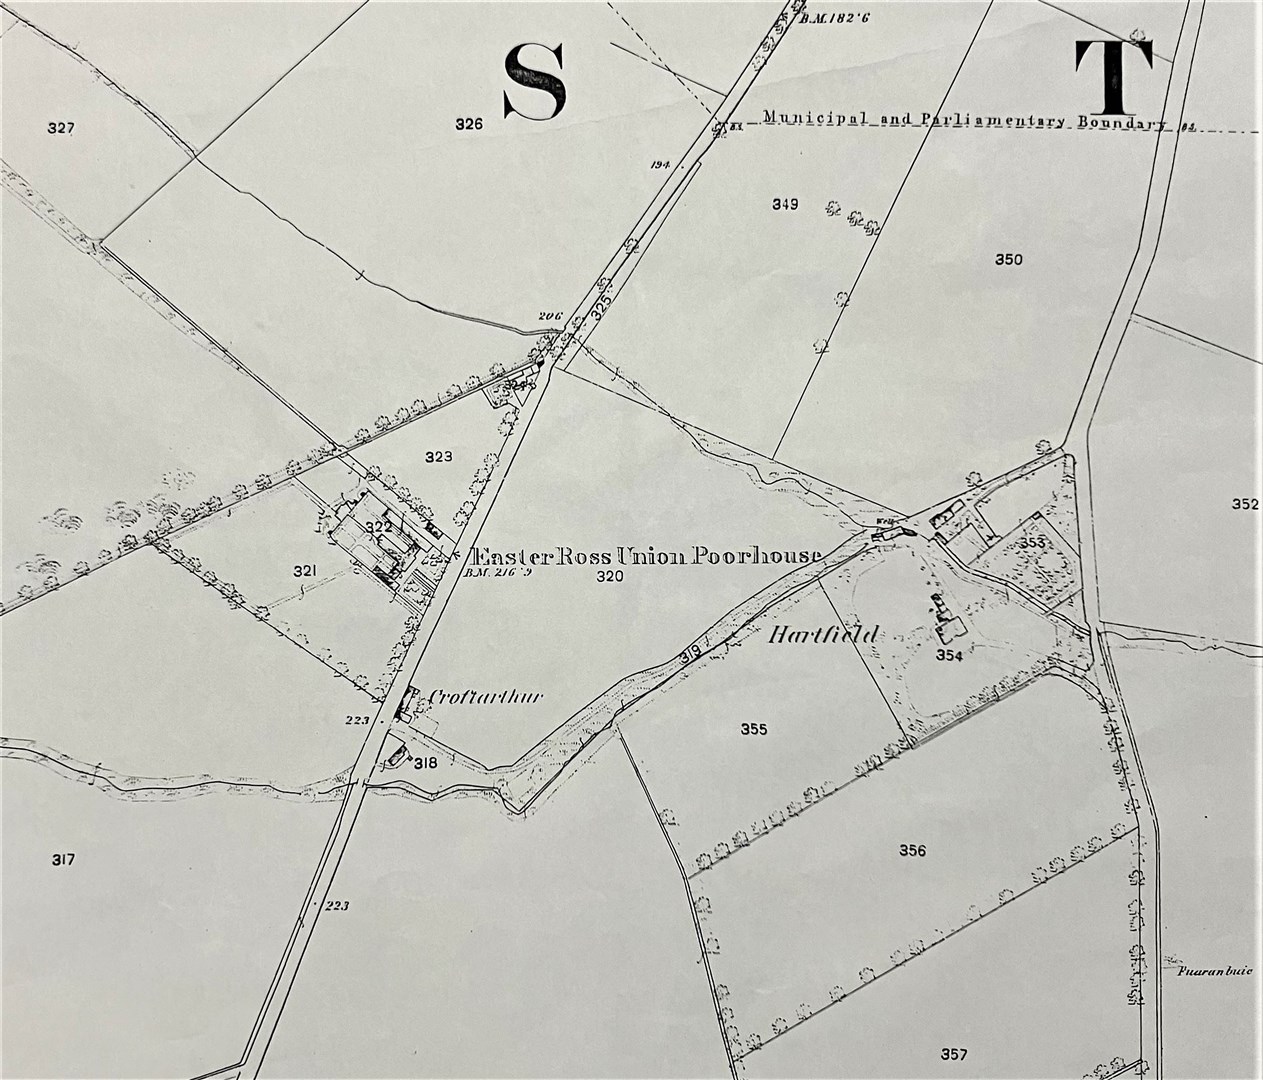 Extract from the Ross and Cromarty Ordnance Survey map showing Easter Ross Union Poorhouse, 1871.